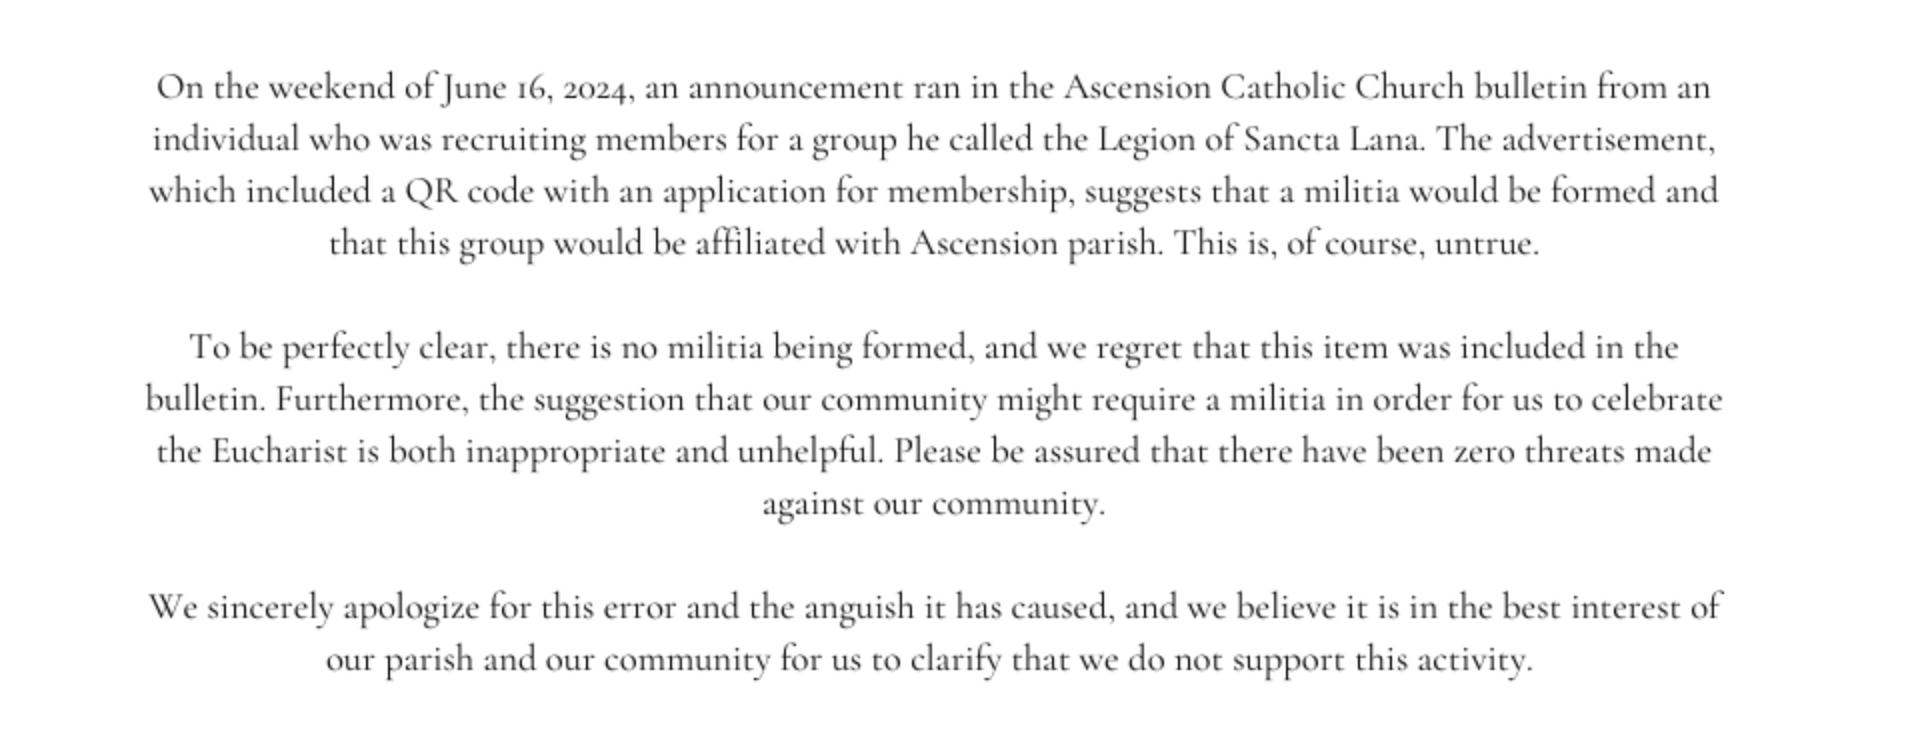 Ascension Catholic Church issued an apology after posting a bulletin calling for the formation of a militia